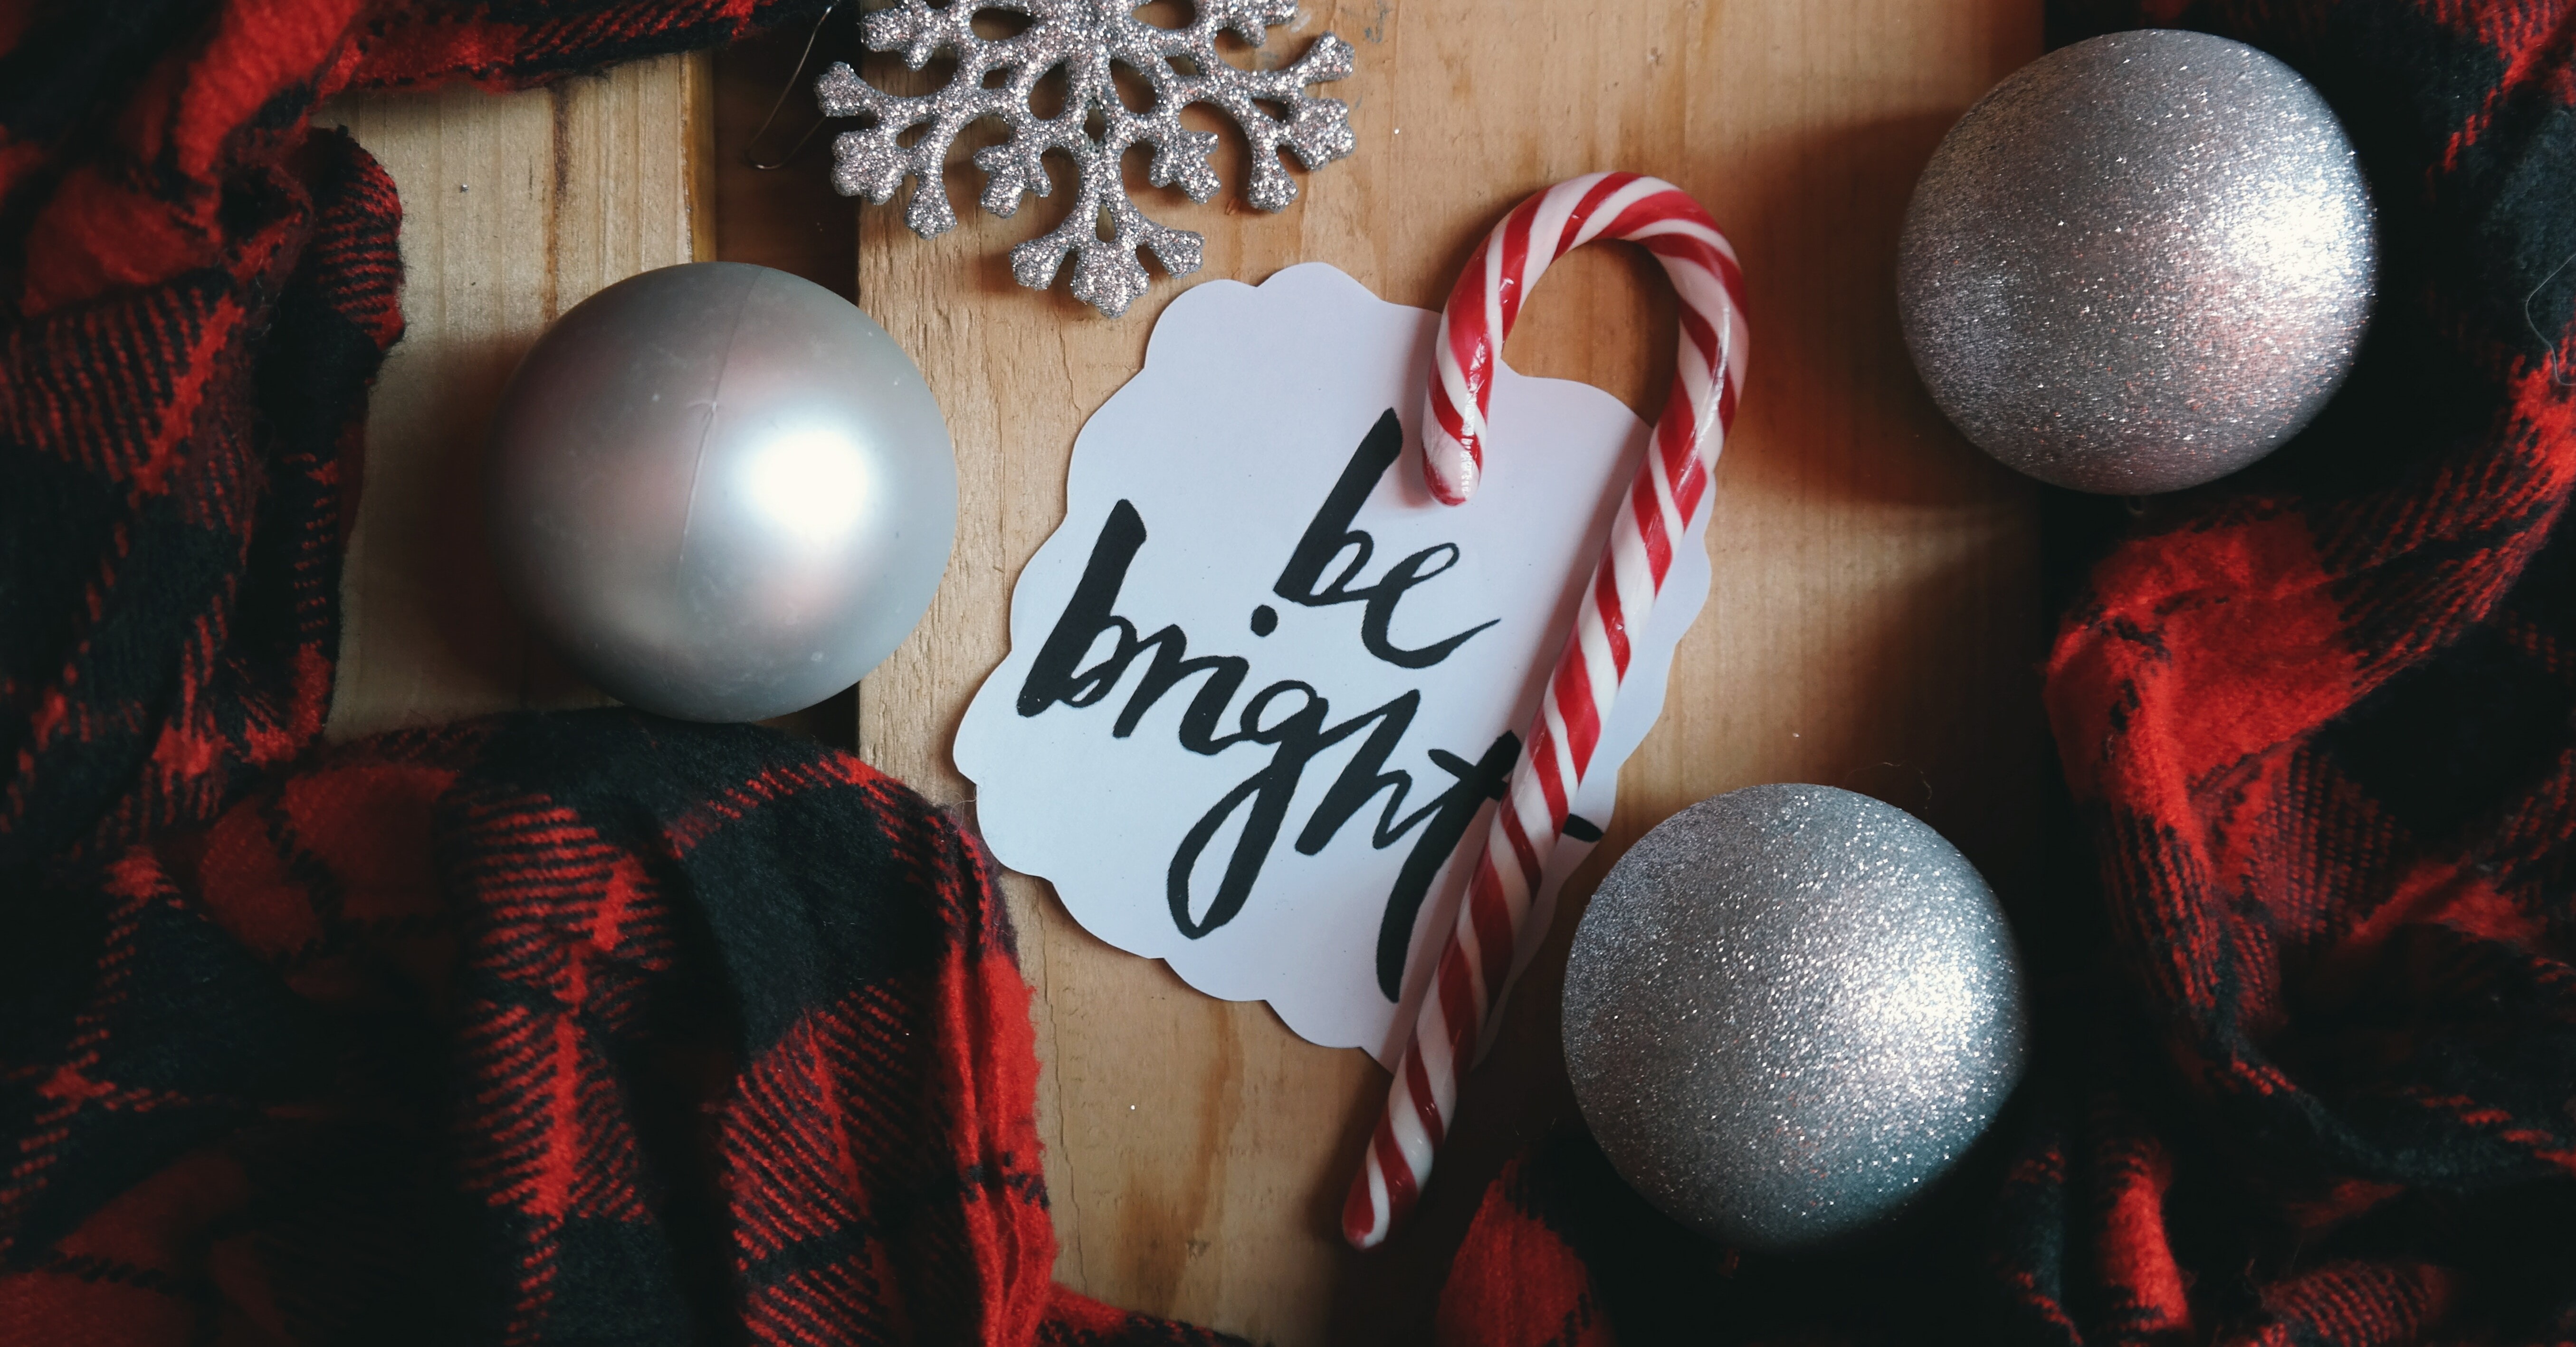 A candy cane on a wooden table. Table also has plaid cloth draped across with silver holiday ornaments. There is also a paper with calligraphy that reads "Be Bright."